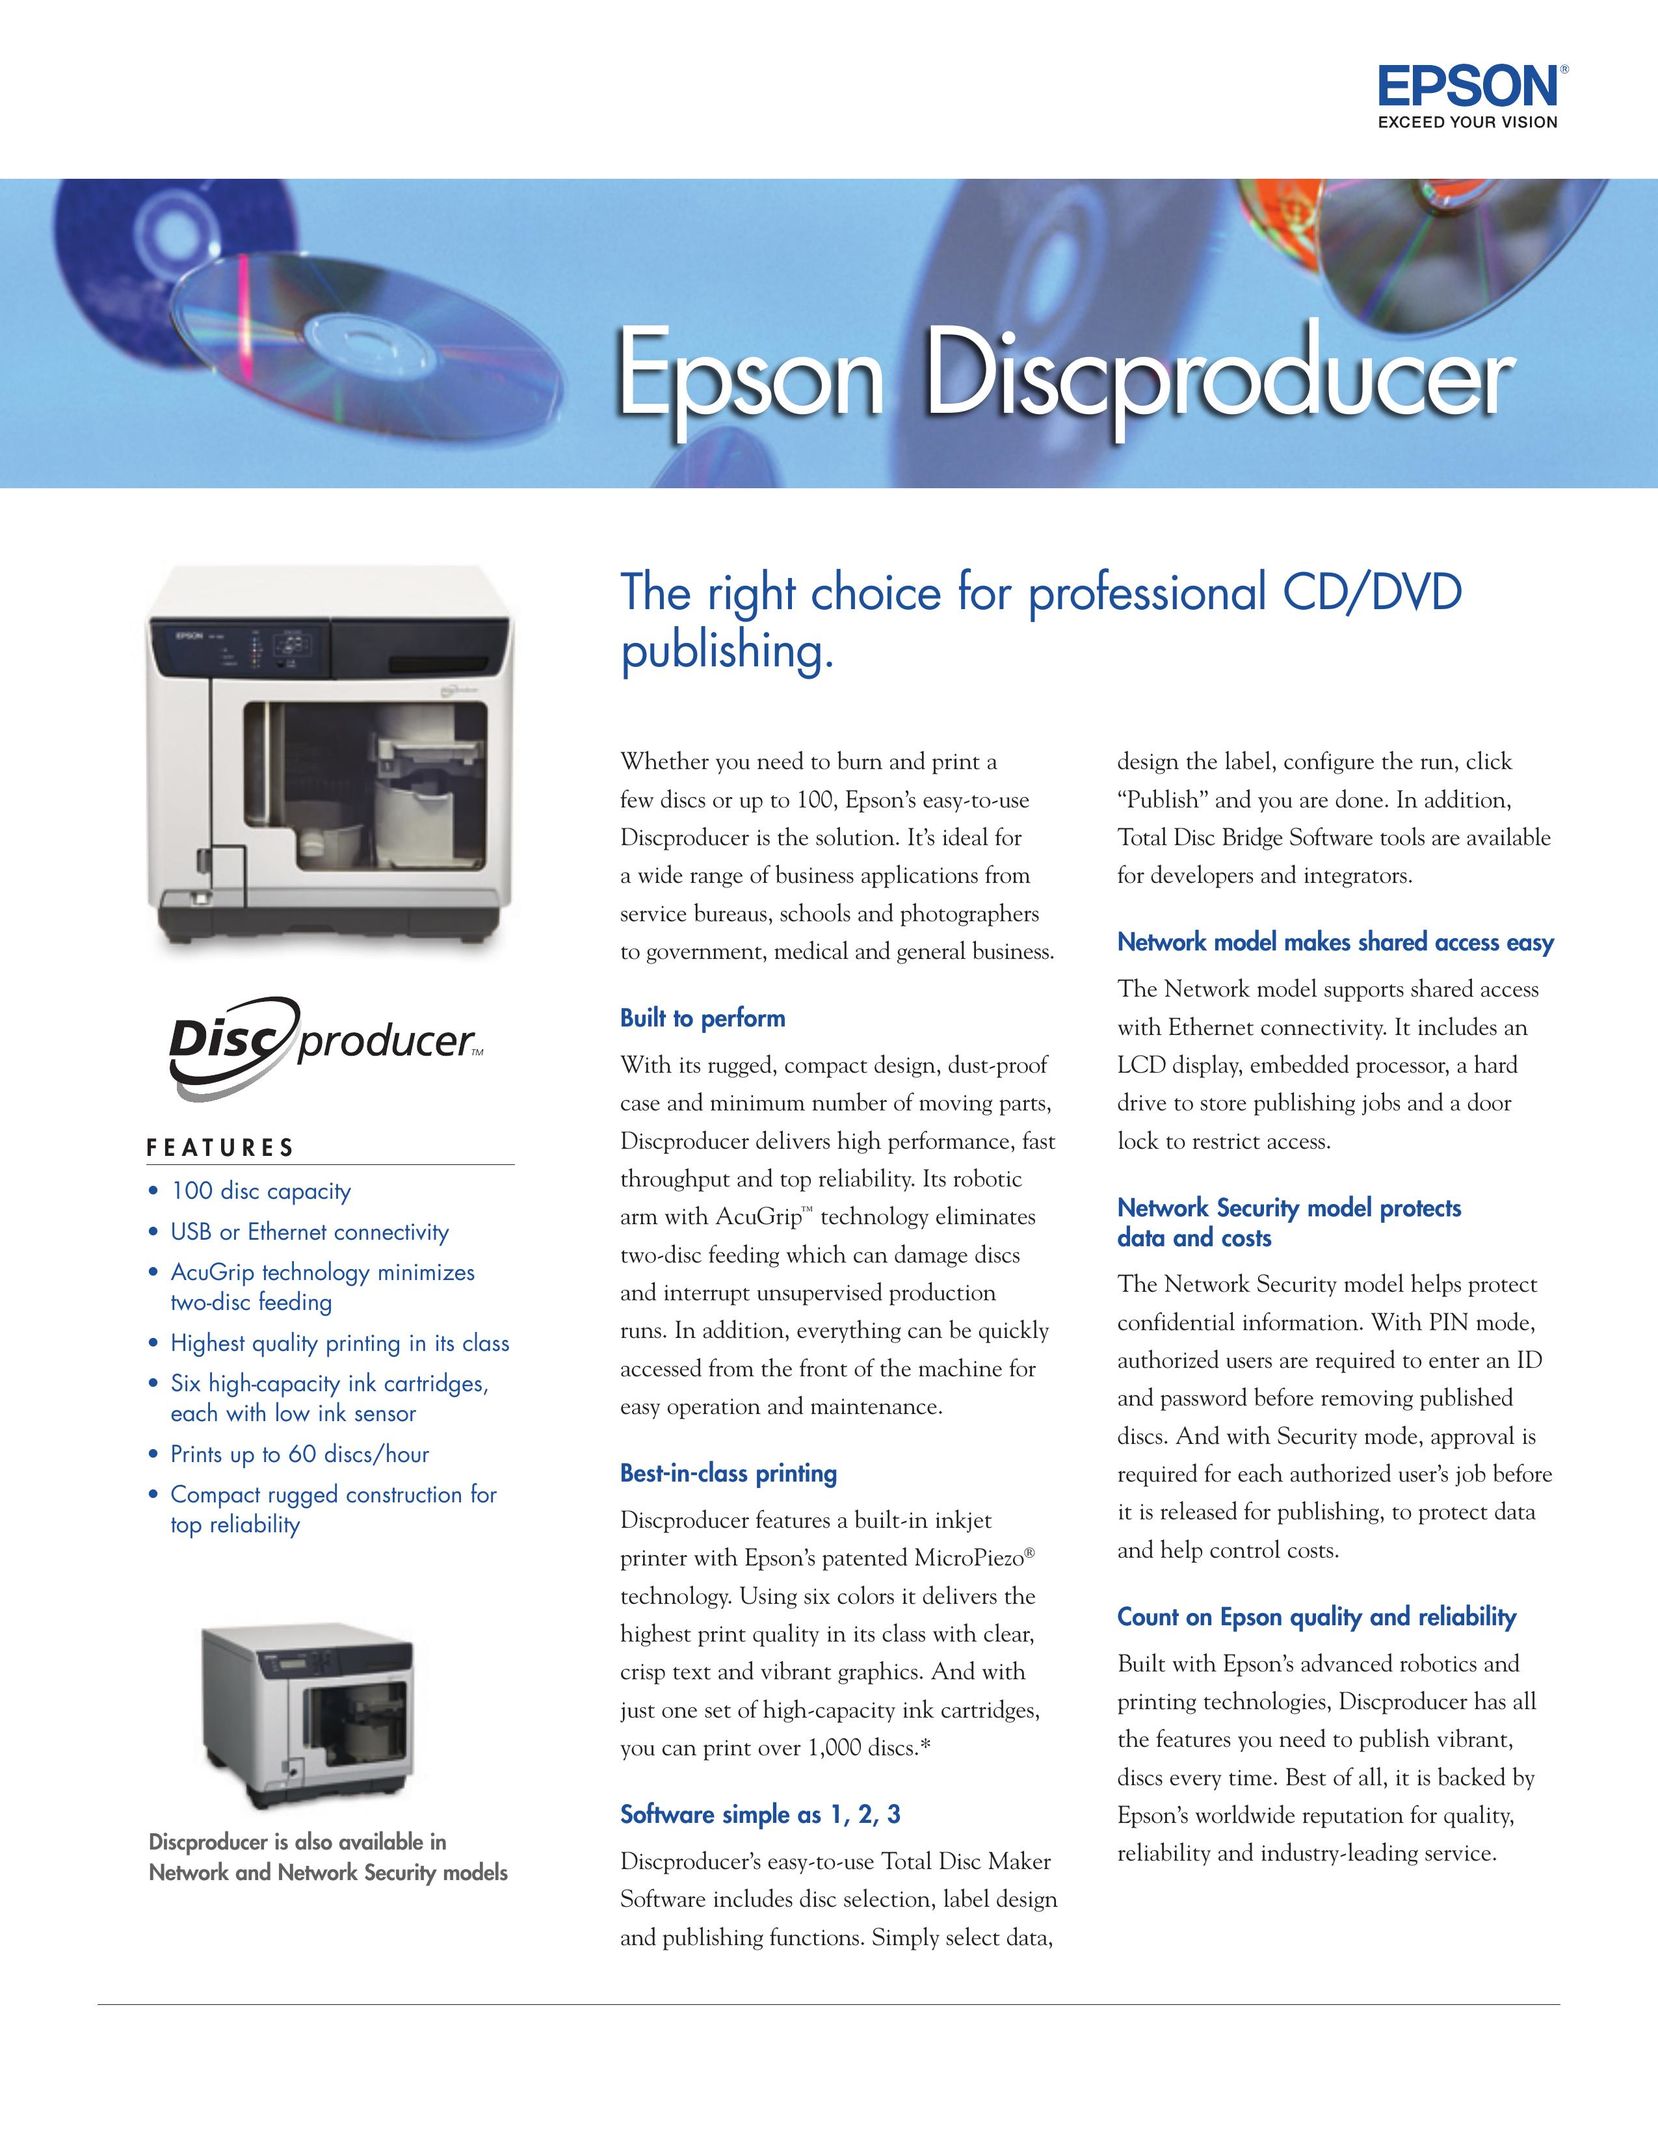 Epson PP-100N DVD Recorder User Manual (Page 1)